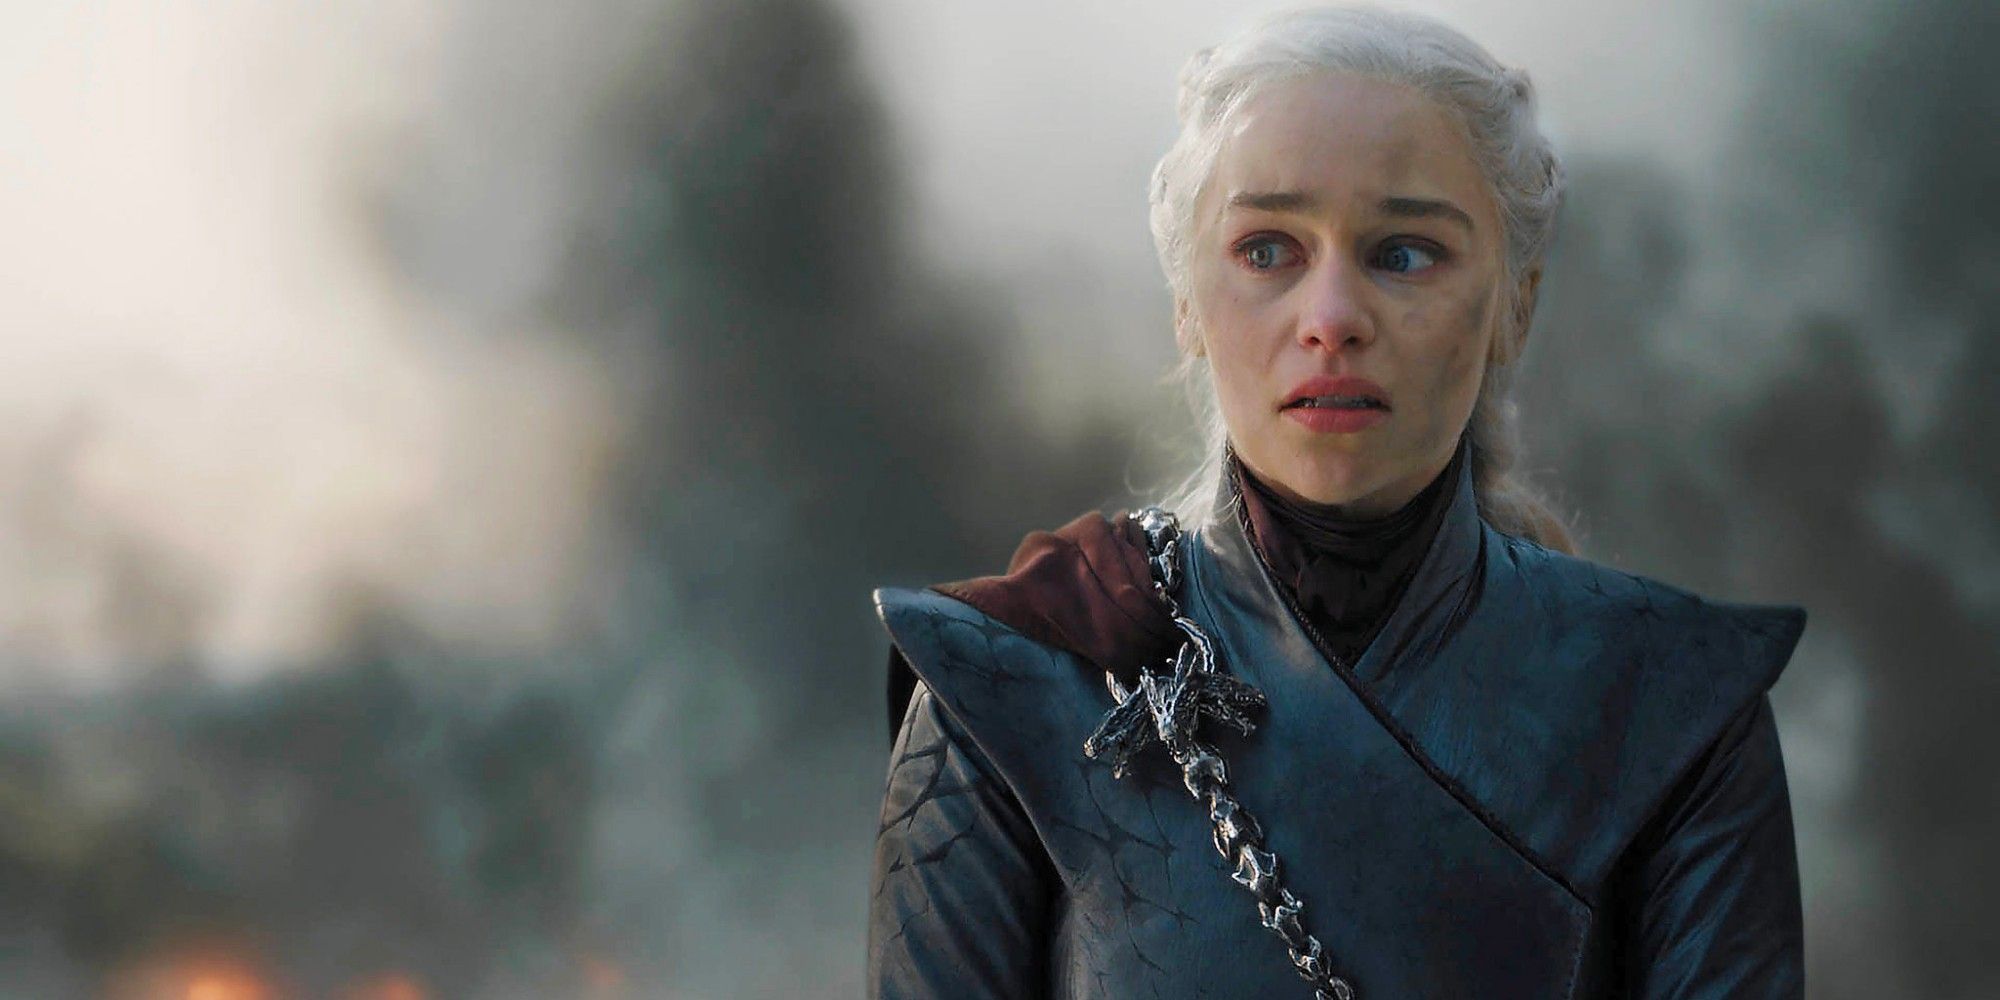 Game Of Thrones Season 8 Criticism Gets Candid Response From Co-Creator